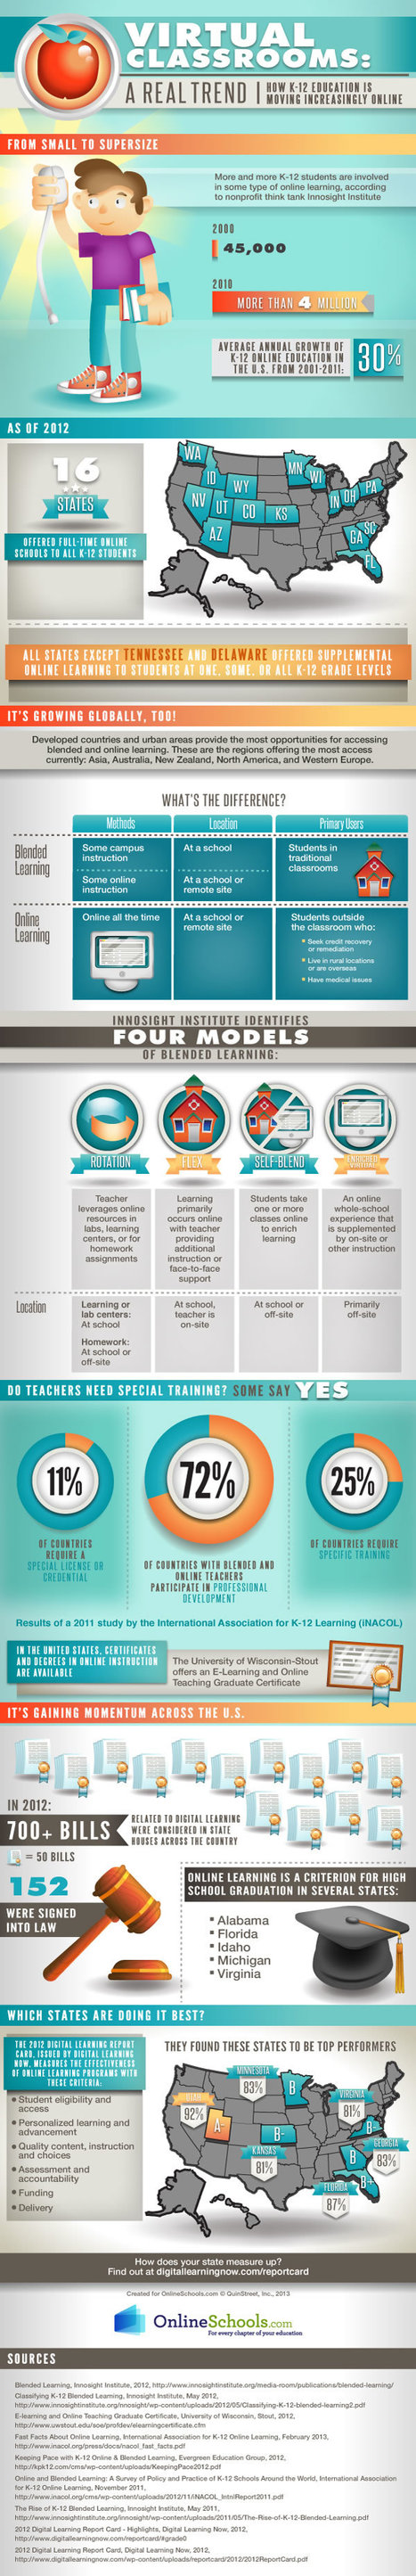 The Teacher's Quick Guide To Blended Learning [Infographic] | Education Matters - (tech and non-tech) | Scoop.it